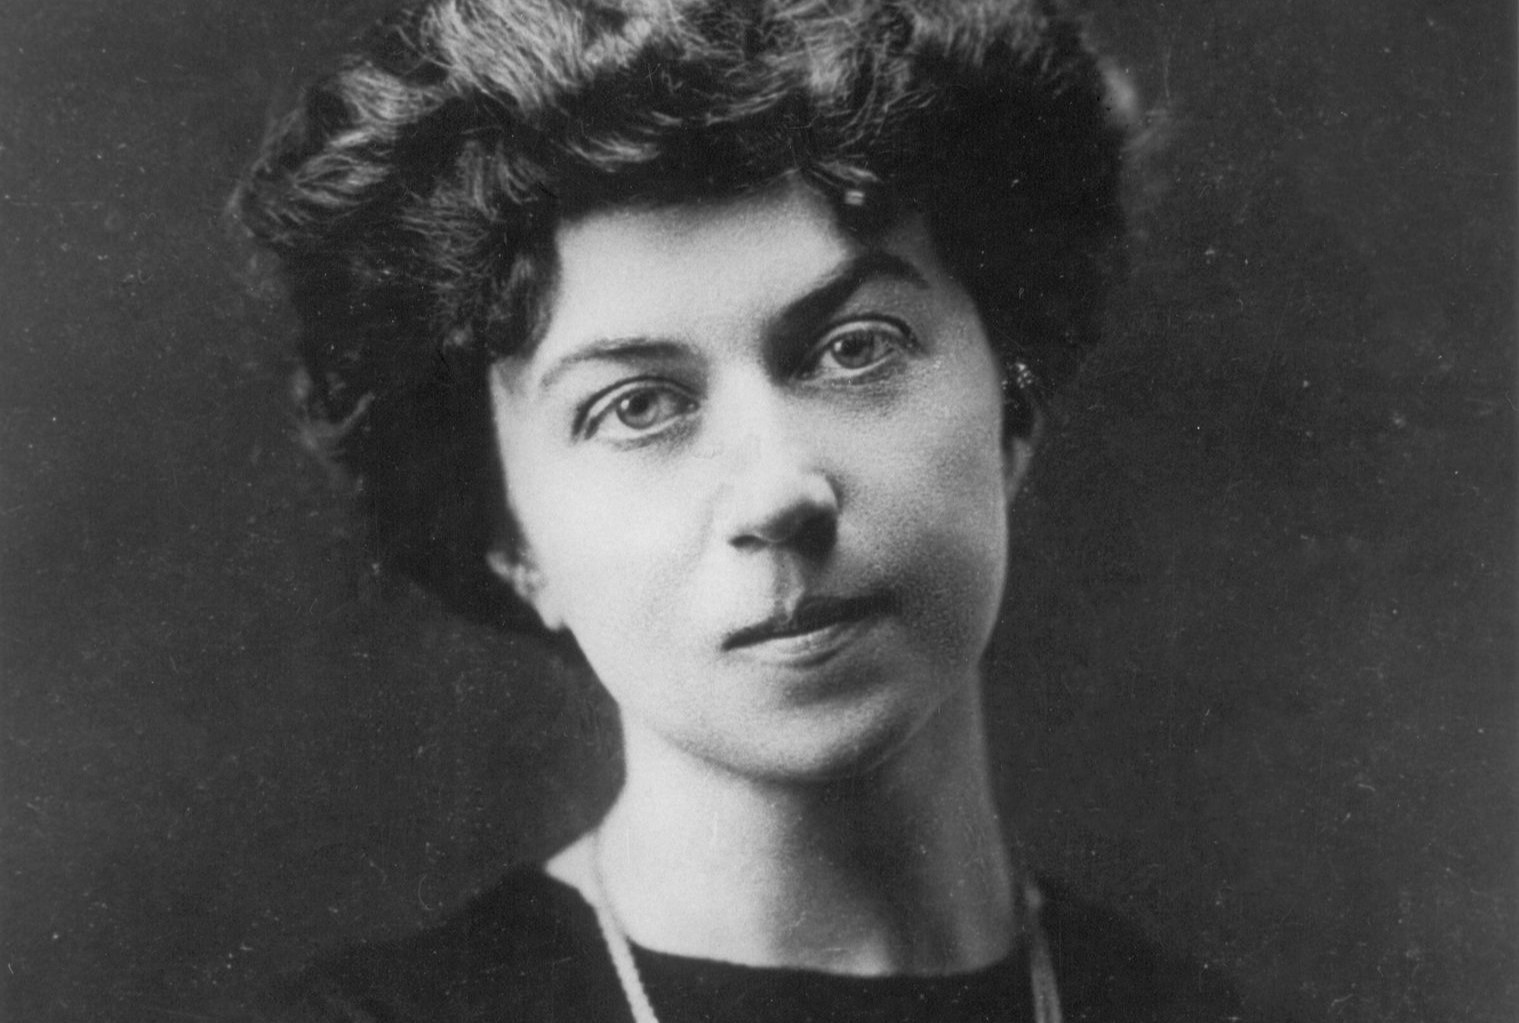 Alexandra kollontai, russian revolutionary, social theorist and stateswoman (1872-1952), kollontai in 1910. (Photo by: Sovfoto/Universal Images Group via Getty Images)